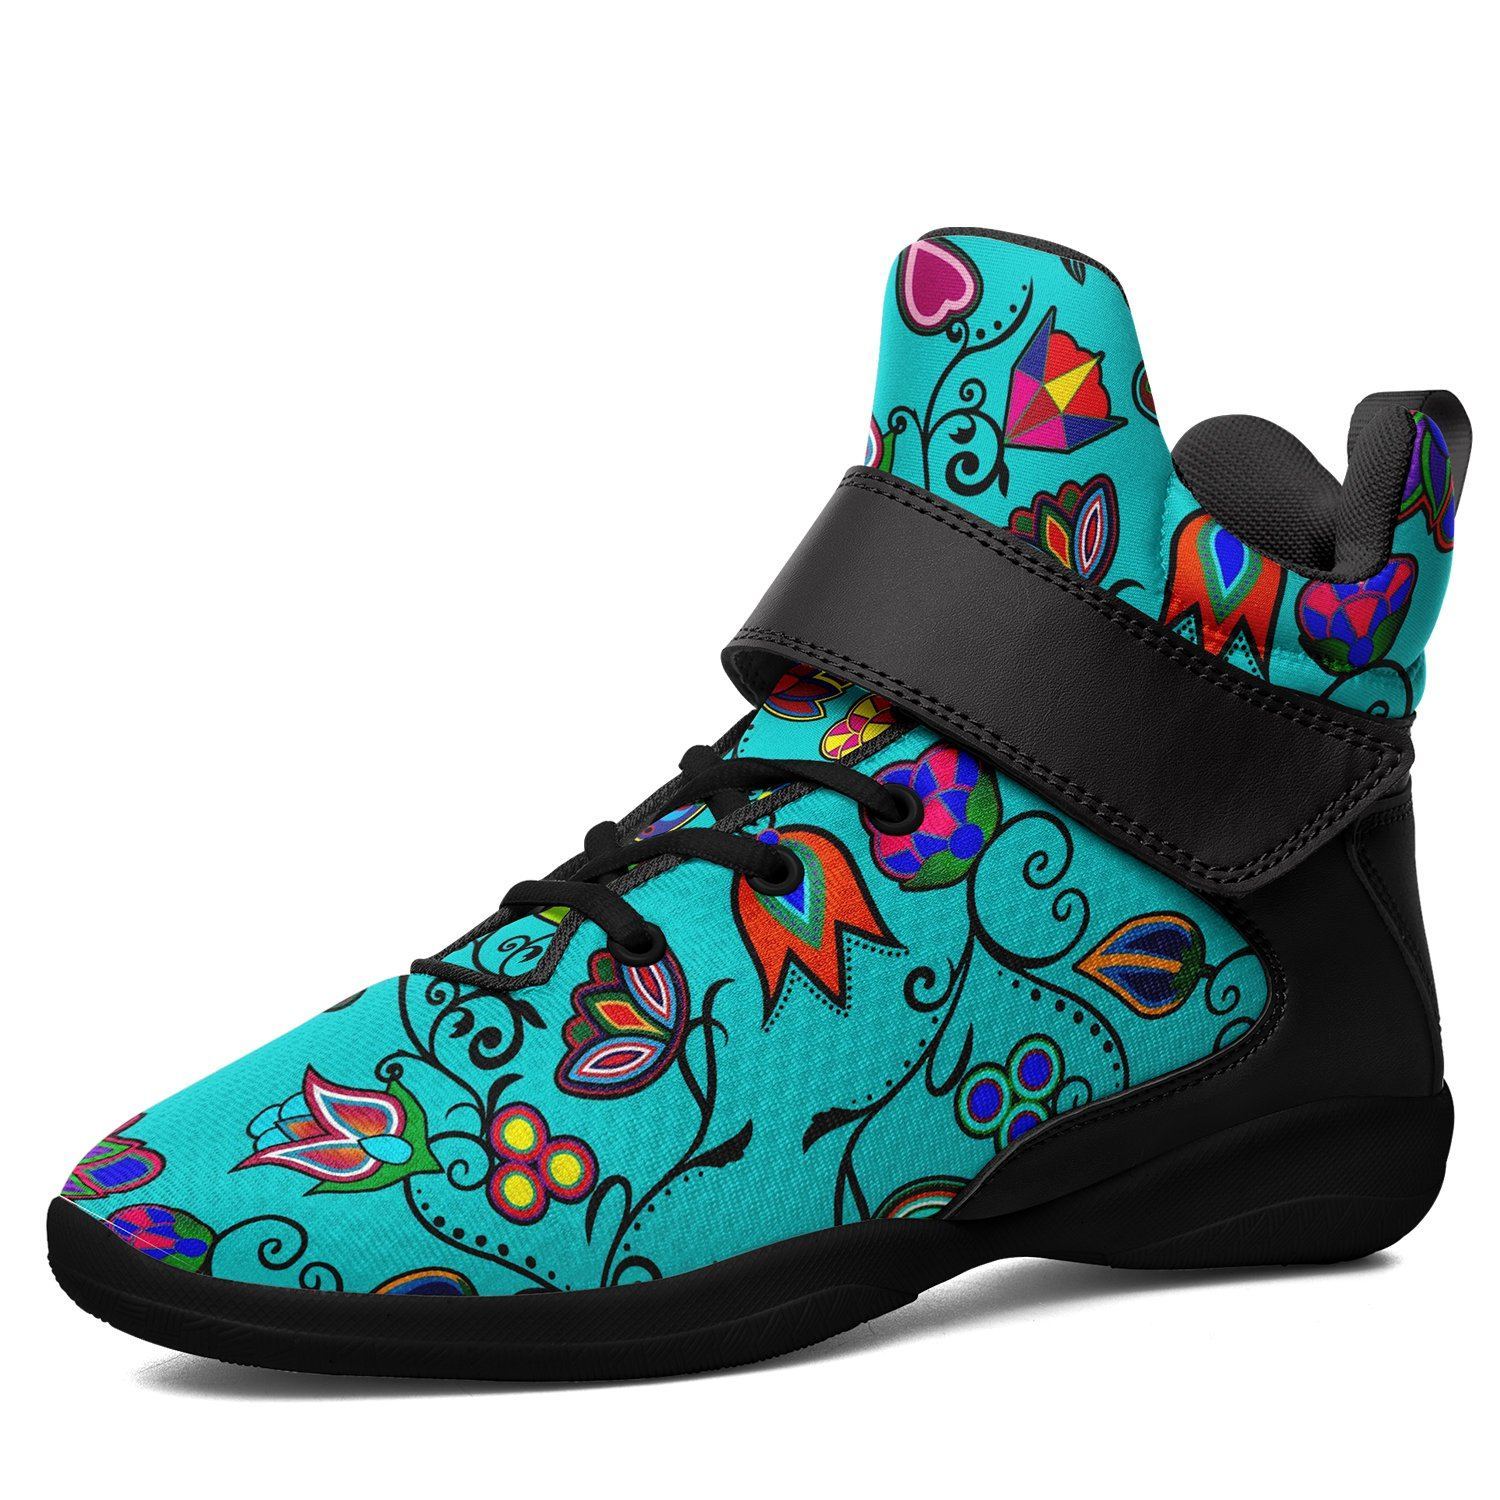 Indigenous Paisley Sky Kid's Ipottaa Basketball / Sport High Top Shoes 49 Dzine US Child 12.5 / EUR 30 Black Sole with Black Strap 